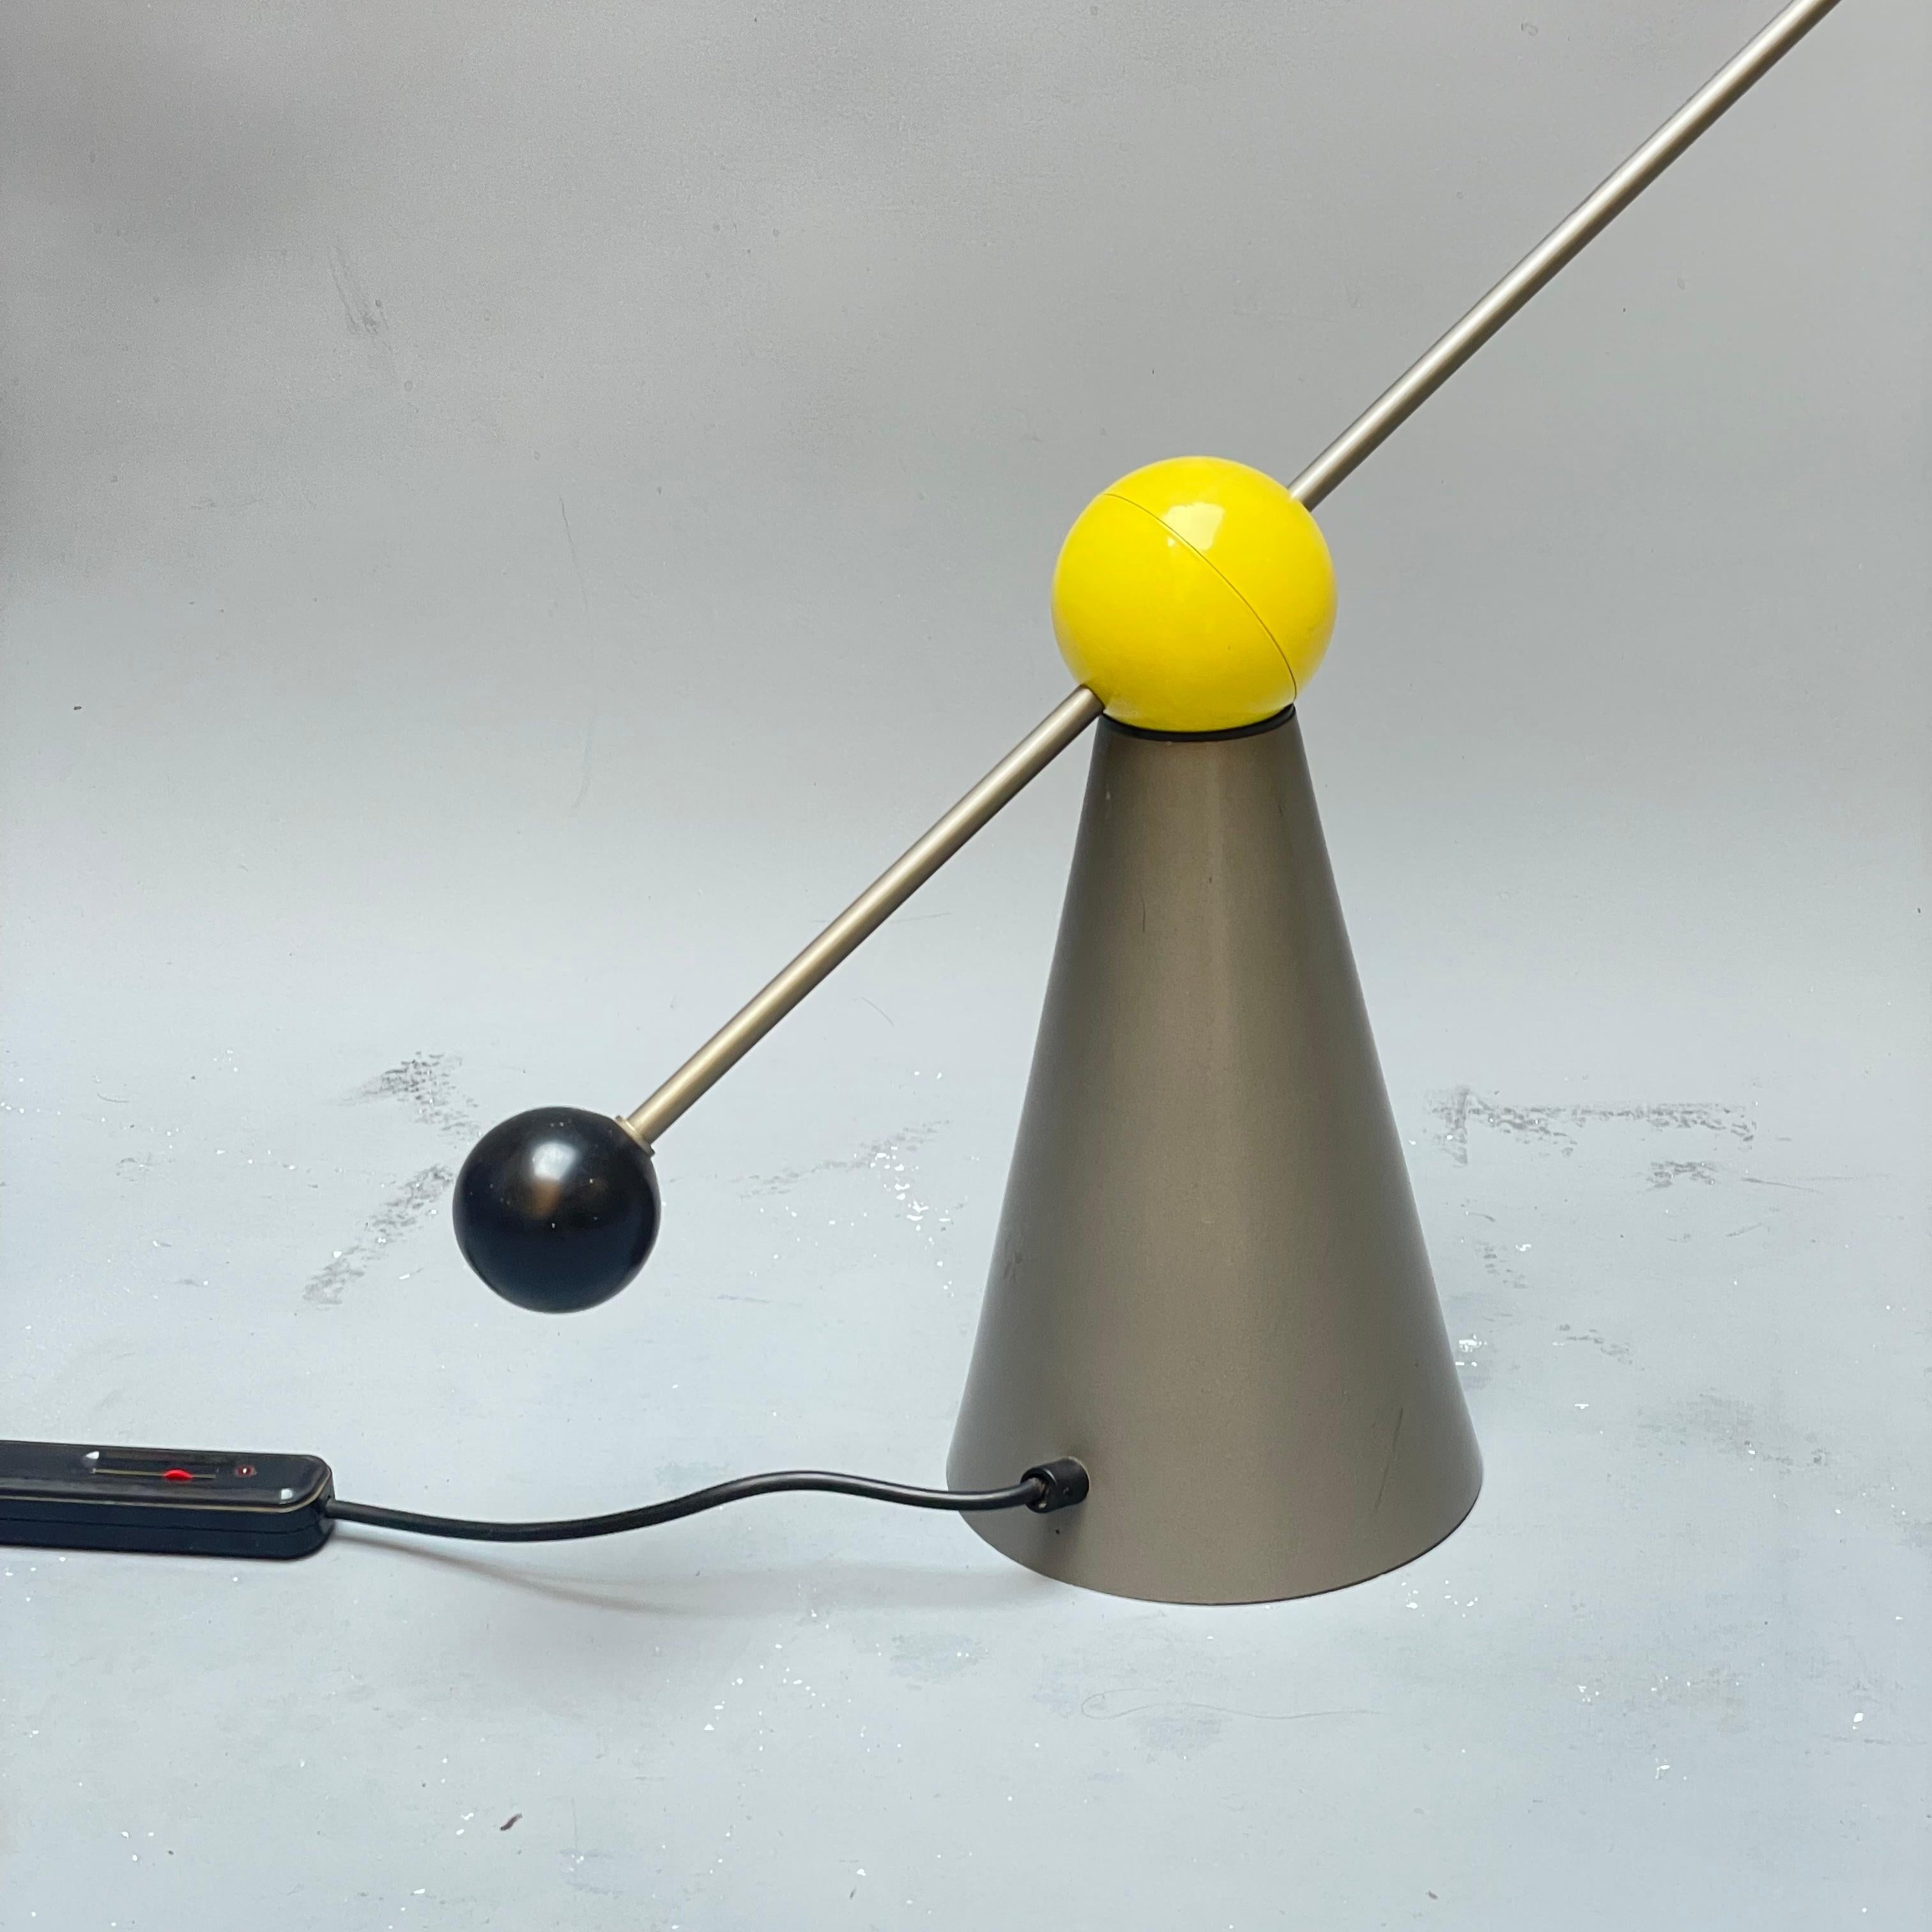 This lamp was produced by Oceano Oltreluce, an Italian lighting company, designed by Pietro Greppi, one of the founders of the company. Its shape clearly recalls the experiments of post-modernist design.
Adjustable in height and depth, this item is